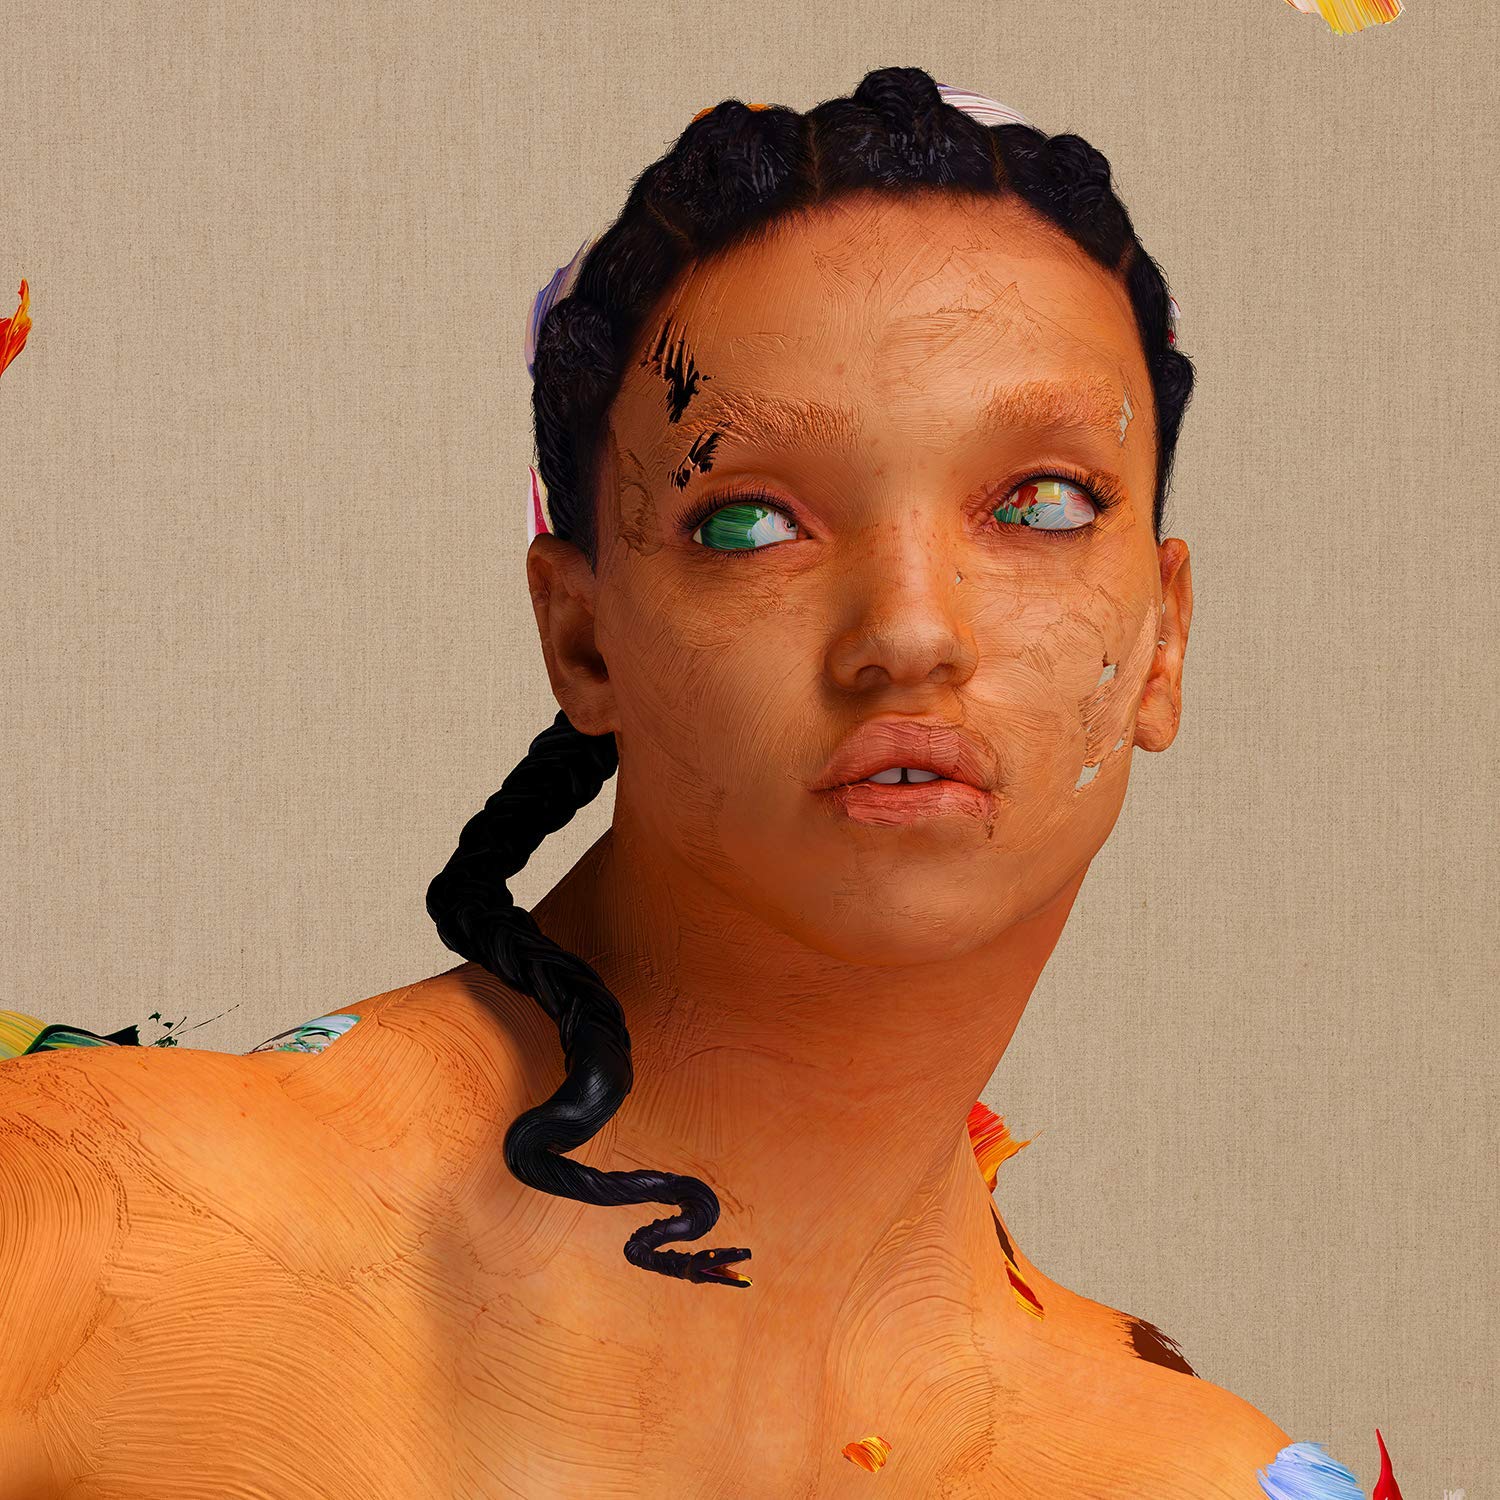 MAGDALENE by FKA twigs by Young Turks